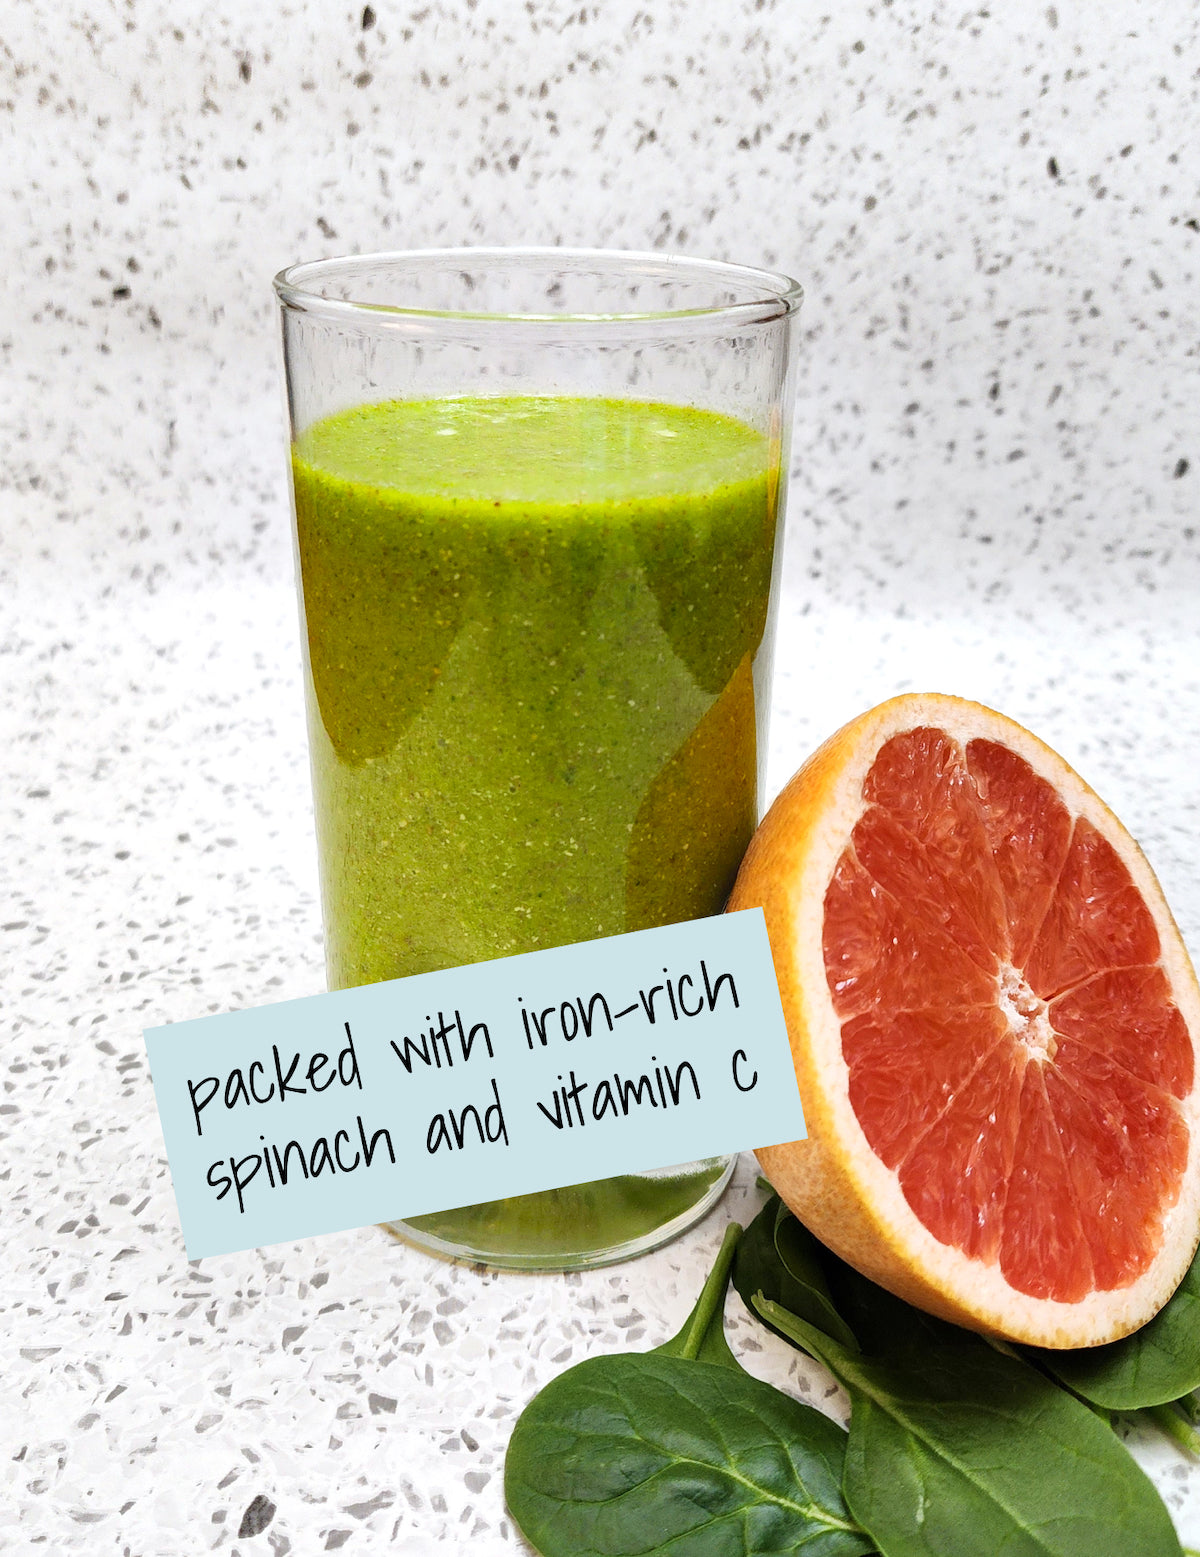 Packed with iron-rich spinach and vitamin c